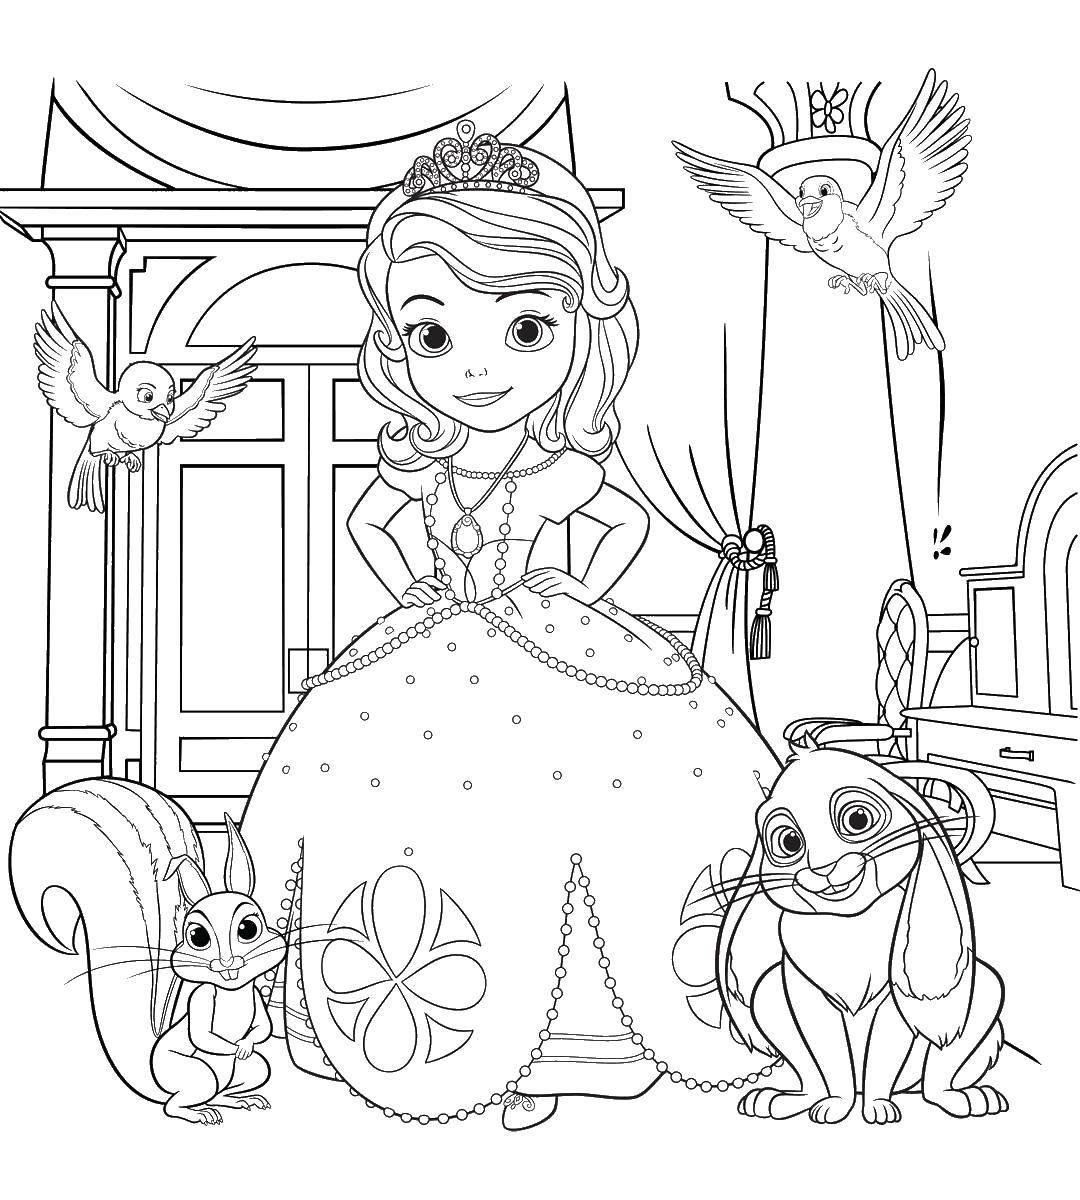 Coloring Princess. Category The characters from fairy tales. Tags:  Princess , dress, rabbit, squirrel.